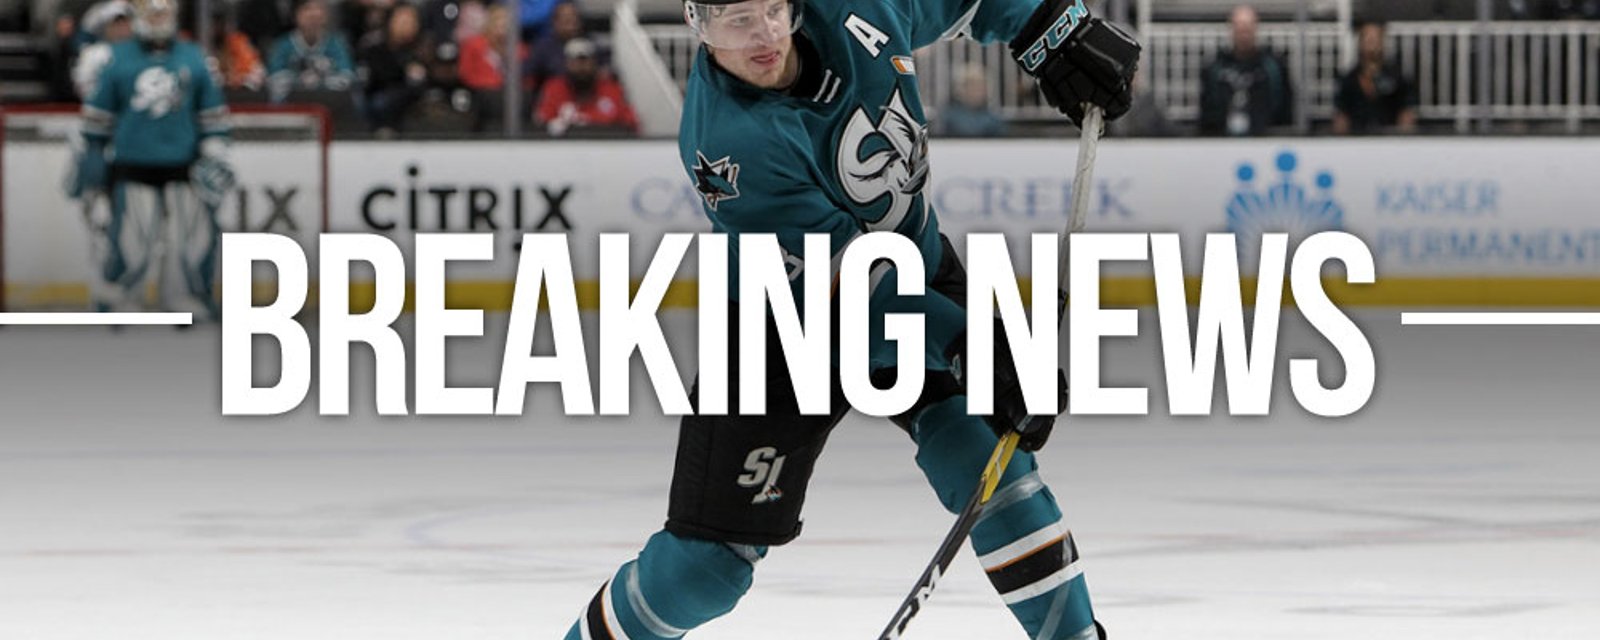 Sharks and Canes make player for player trade 